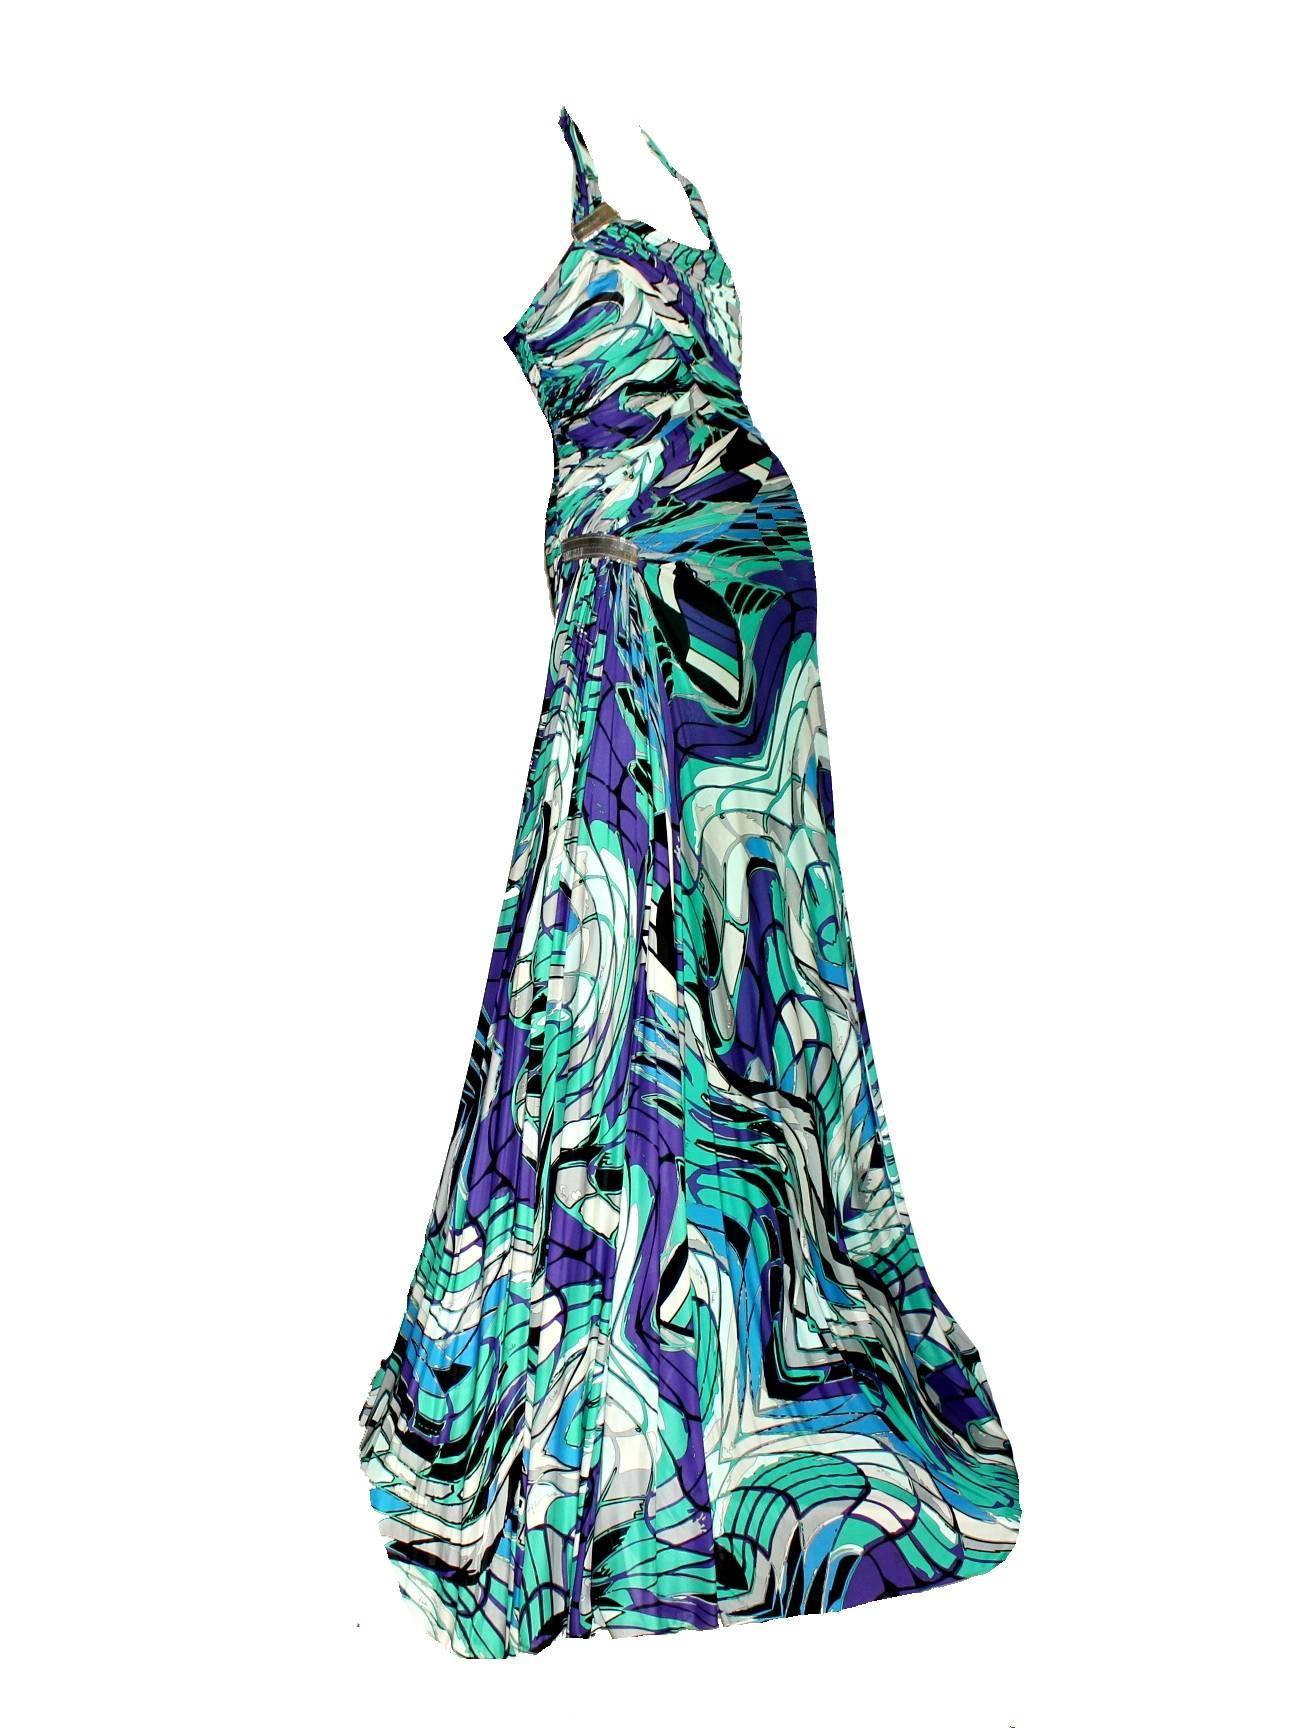 BEAUTIFUL FAMOUS EMILIO PUCCI MULTICOLOR PRING DRAPED MAXI GOWN DRESS

DETAILS:

    Beautiful multicolored jersey in the famous signature print
    Fabric signed discreetly with 